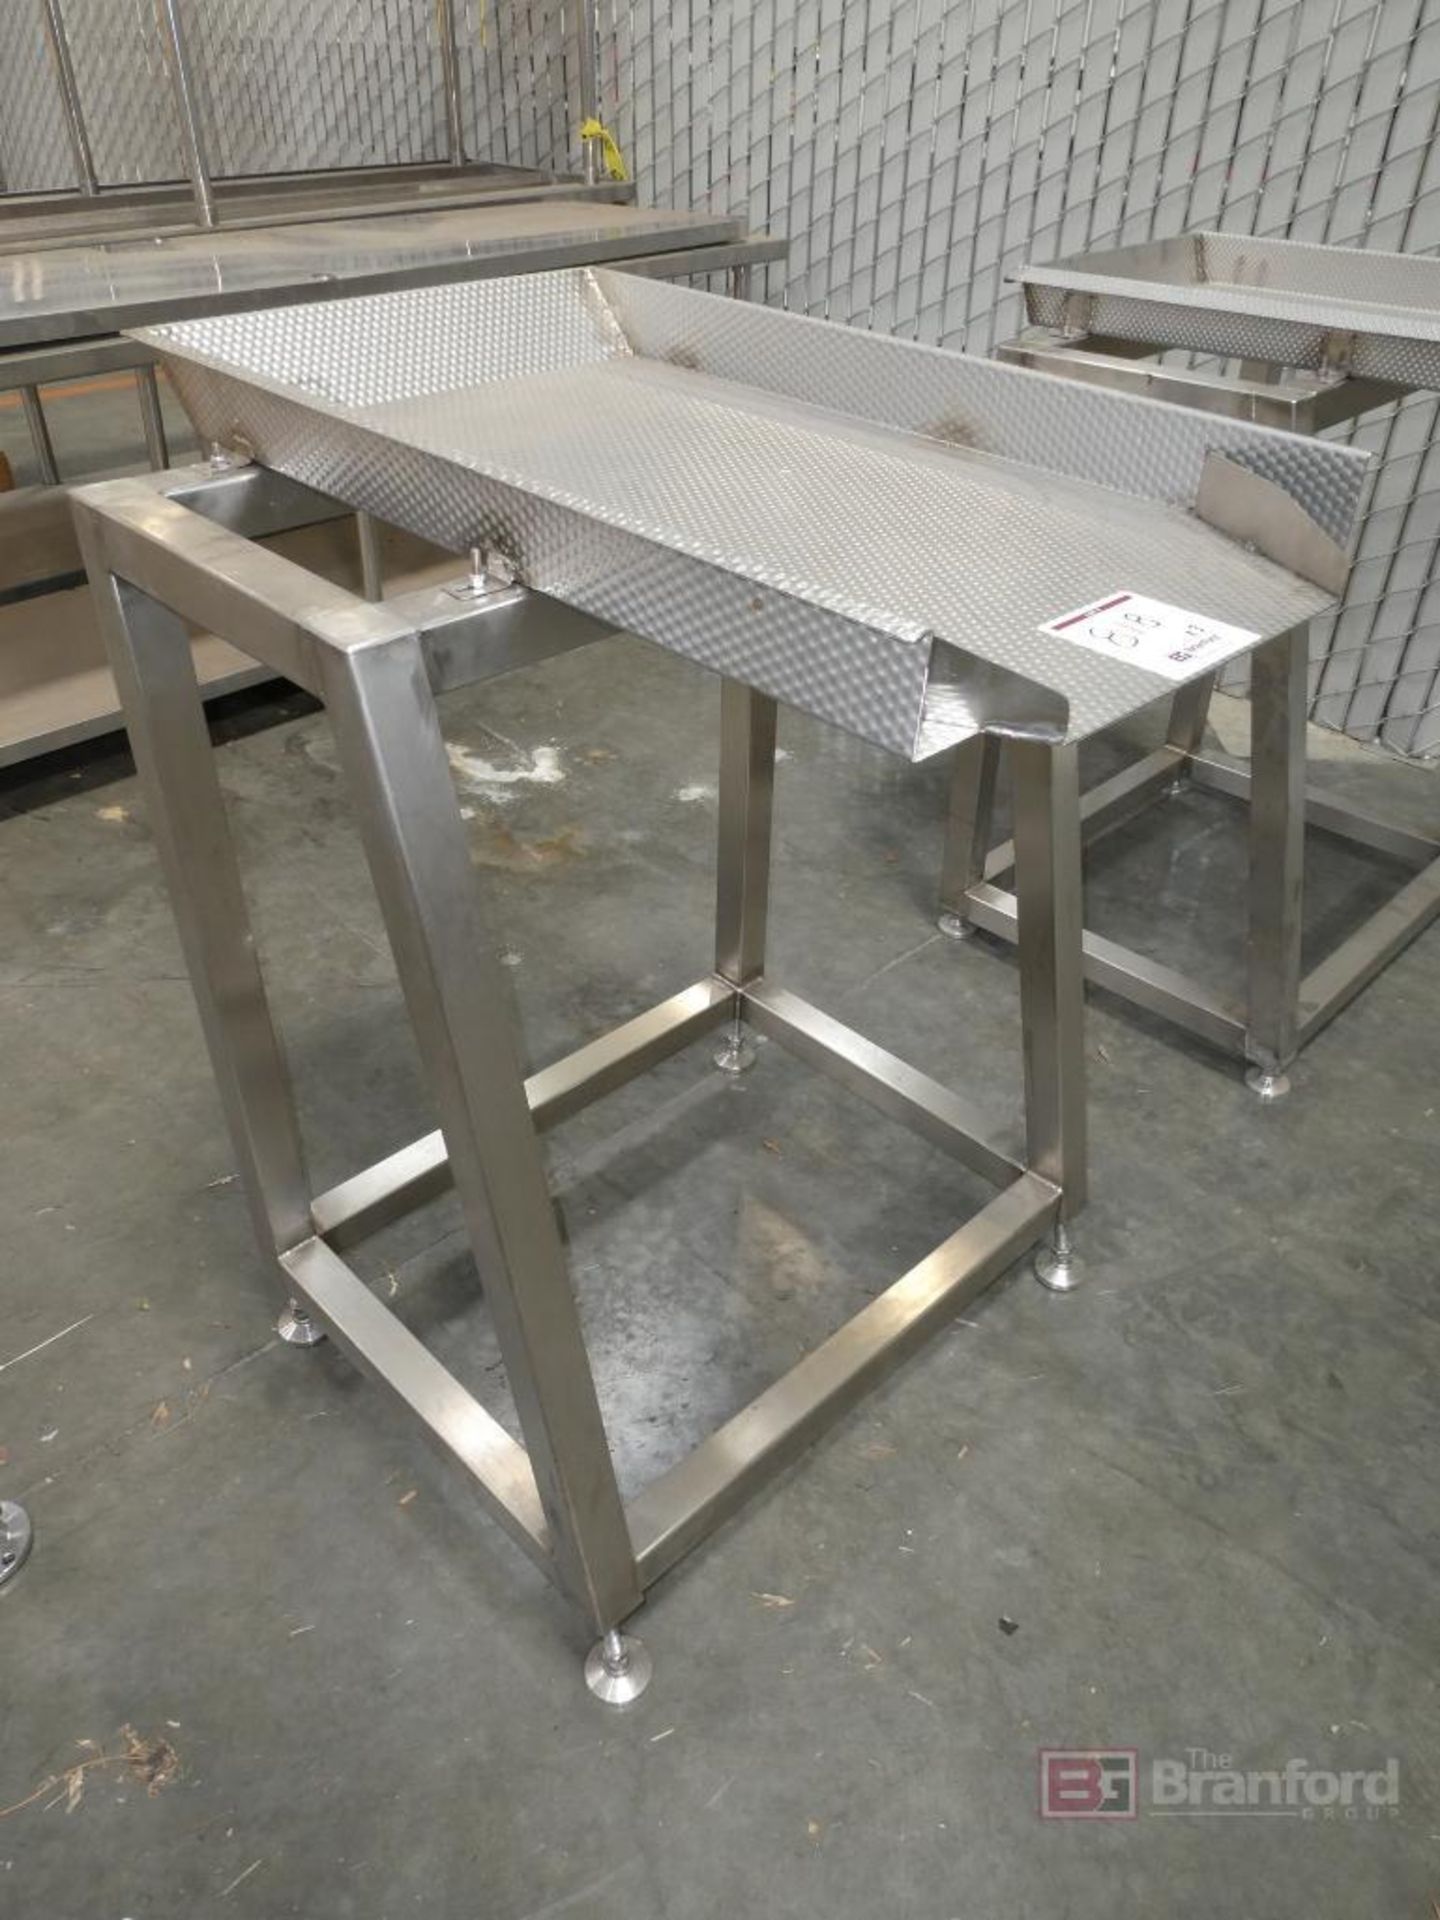 (2) Stainless Steel Production Line Sorting Tables